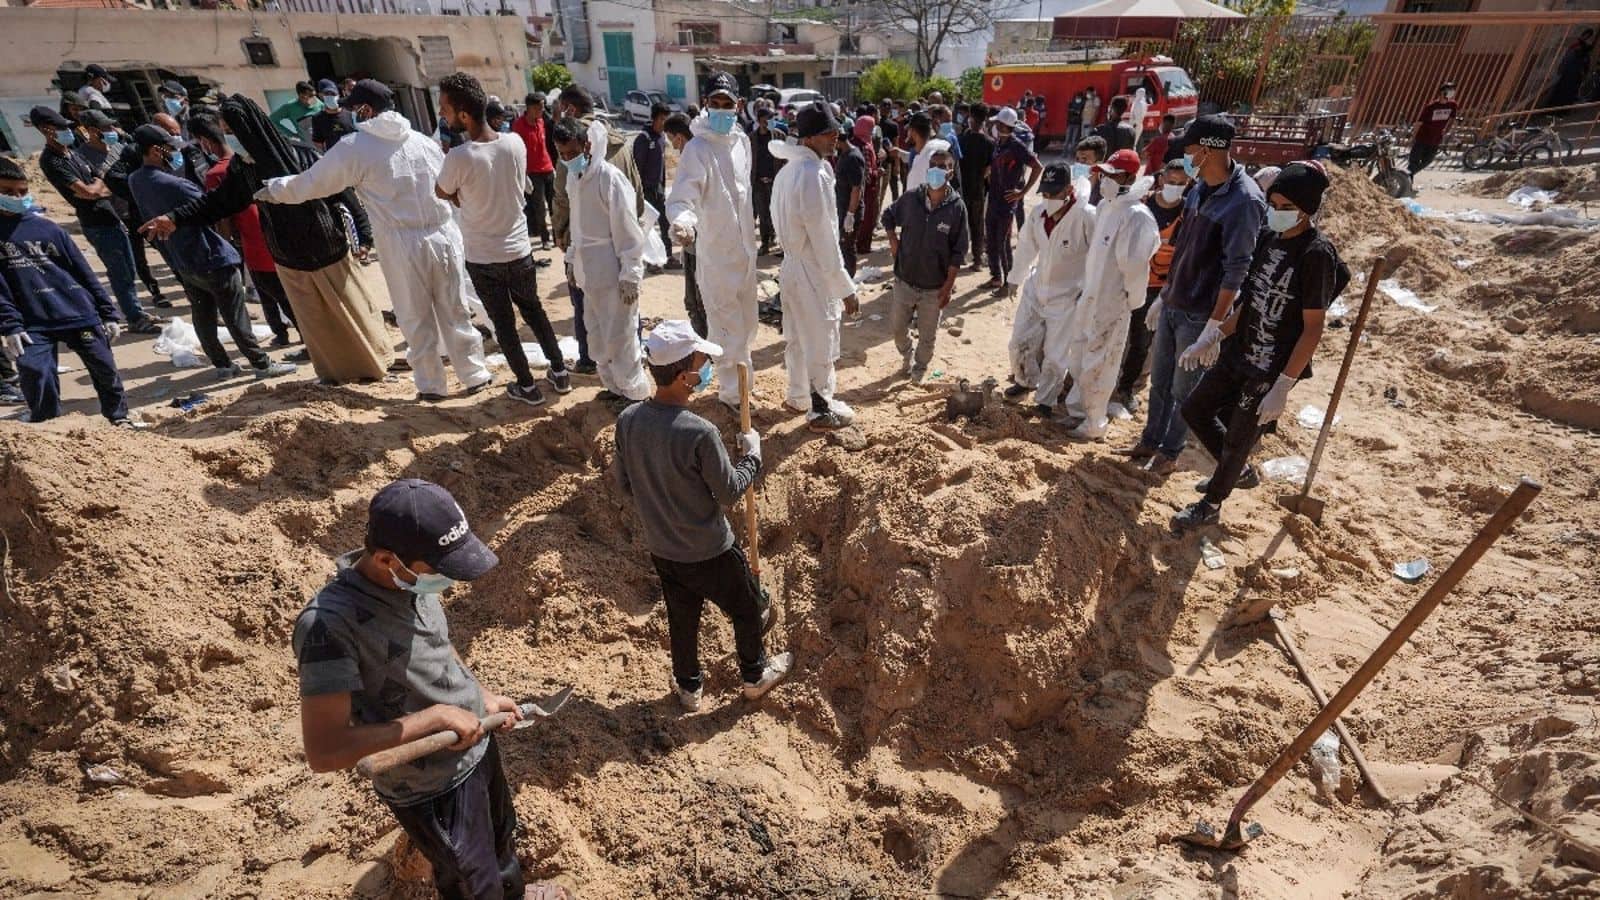 Mass grave unearthed at former Israeli-occupied hospital in Gaza: Report